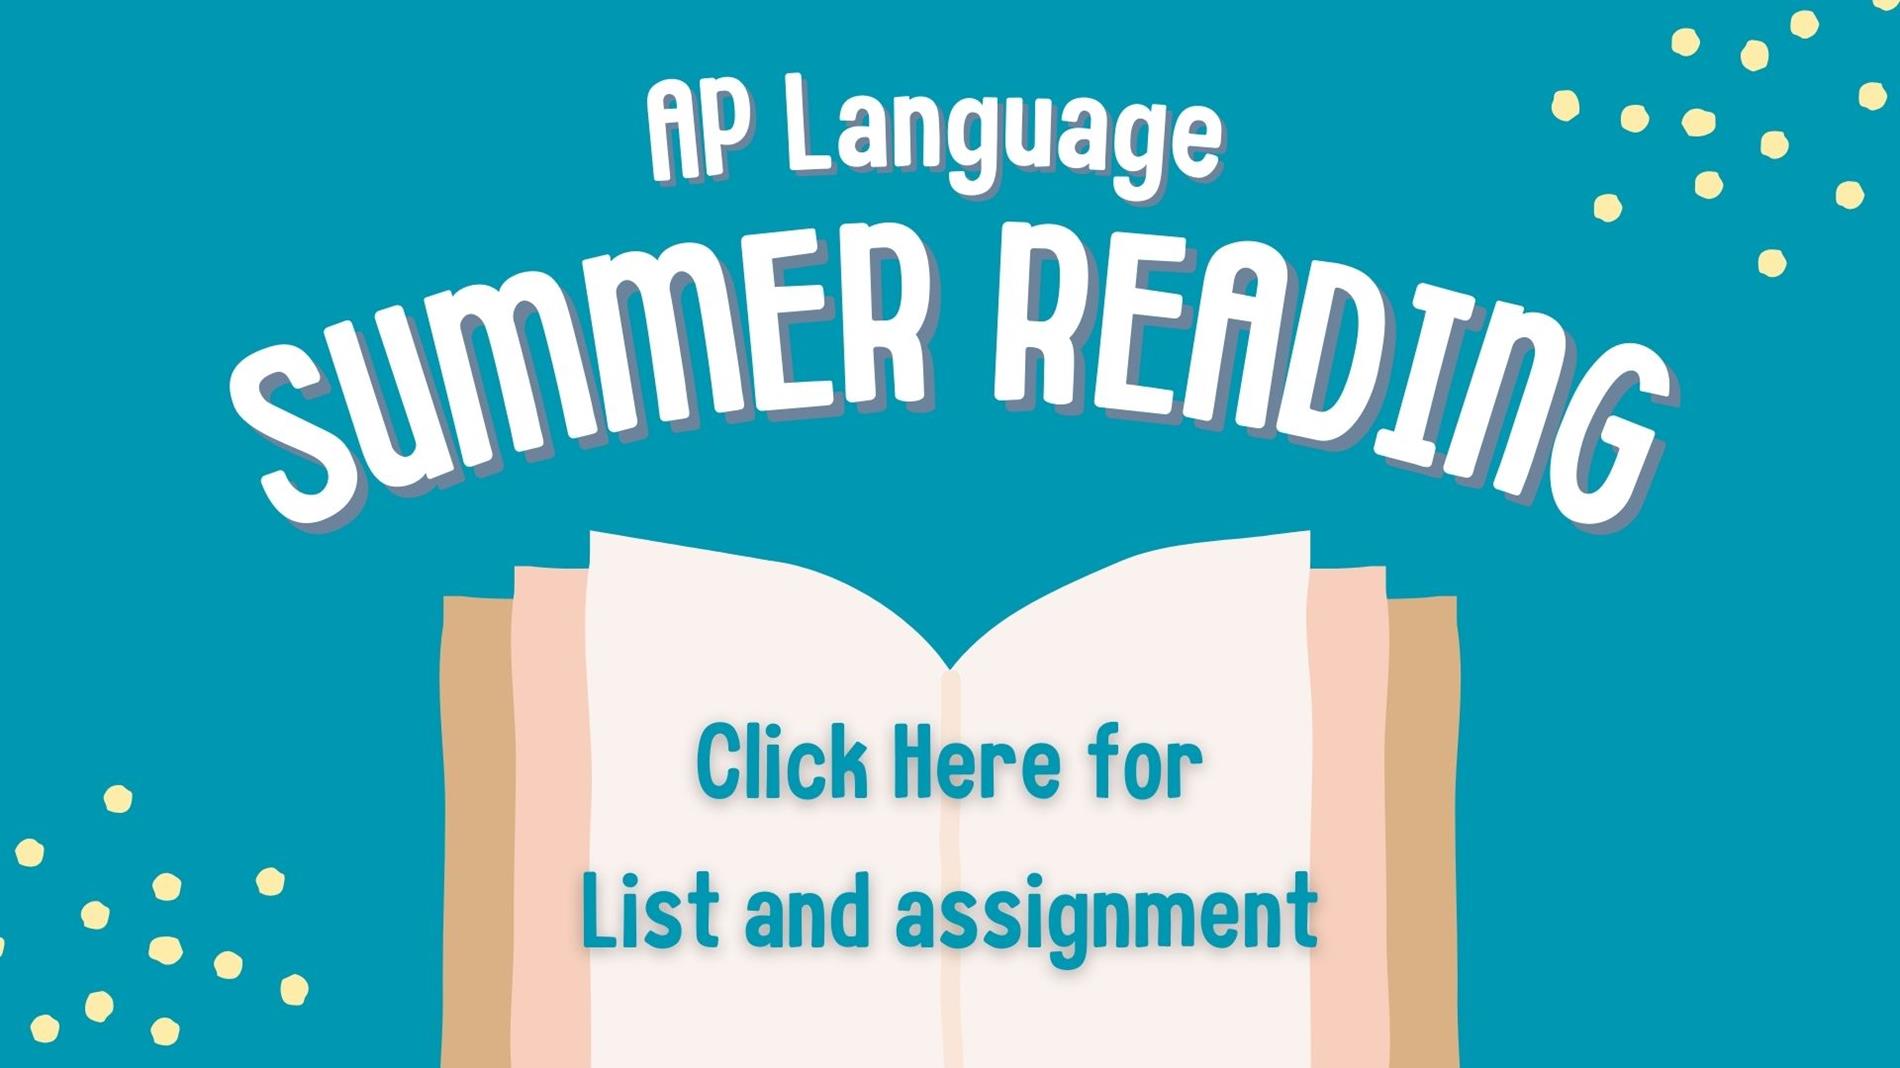 AP Language summer reading Click here